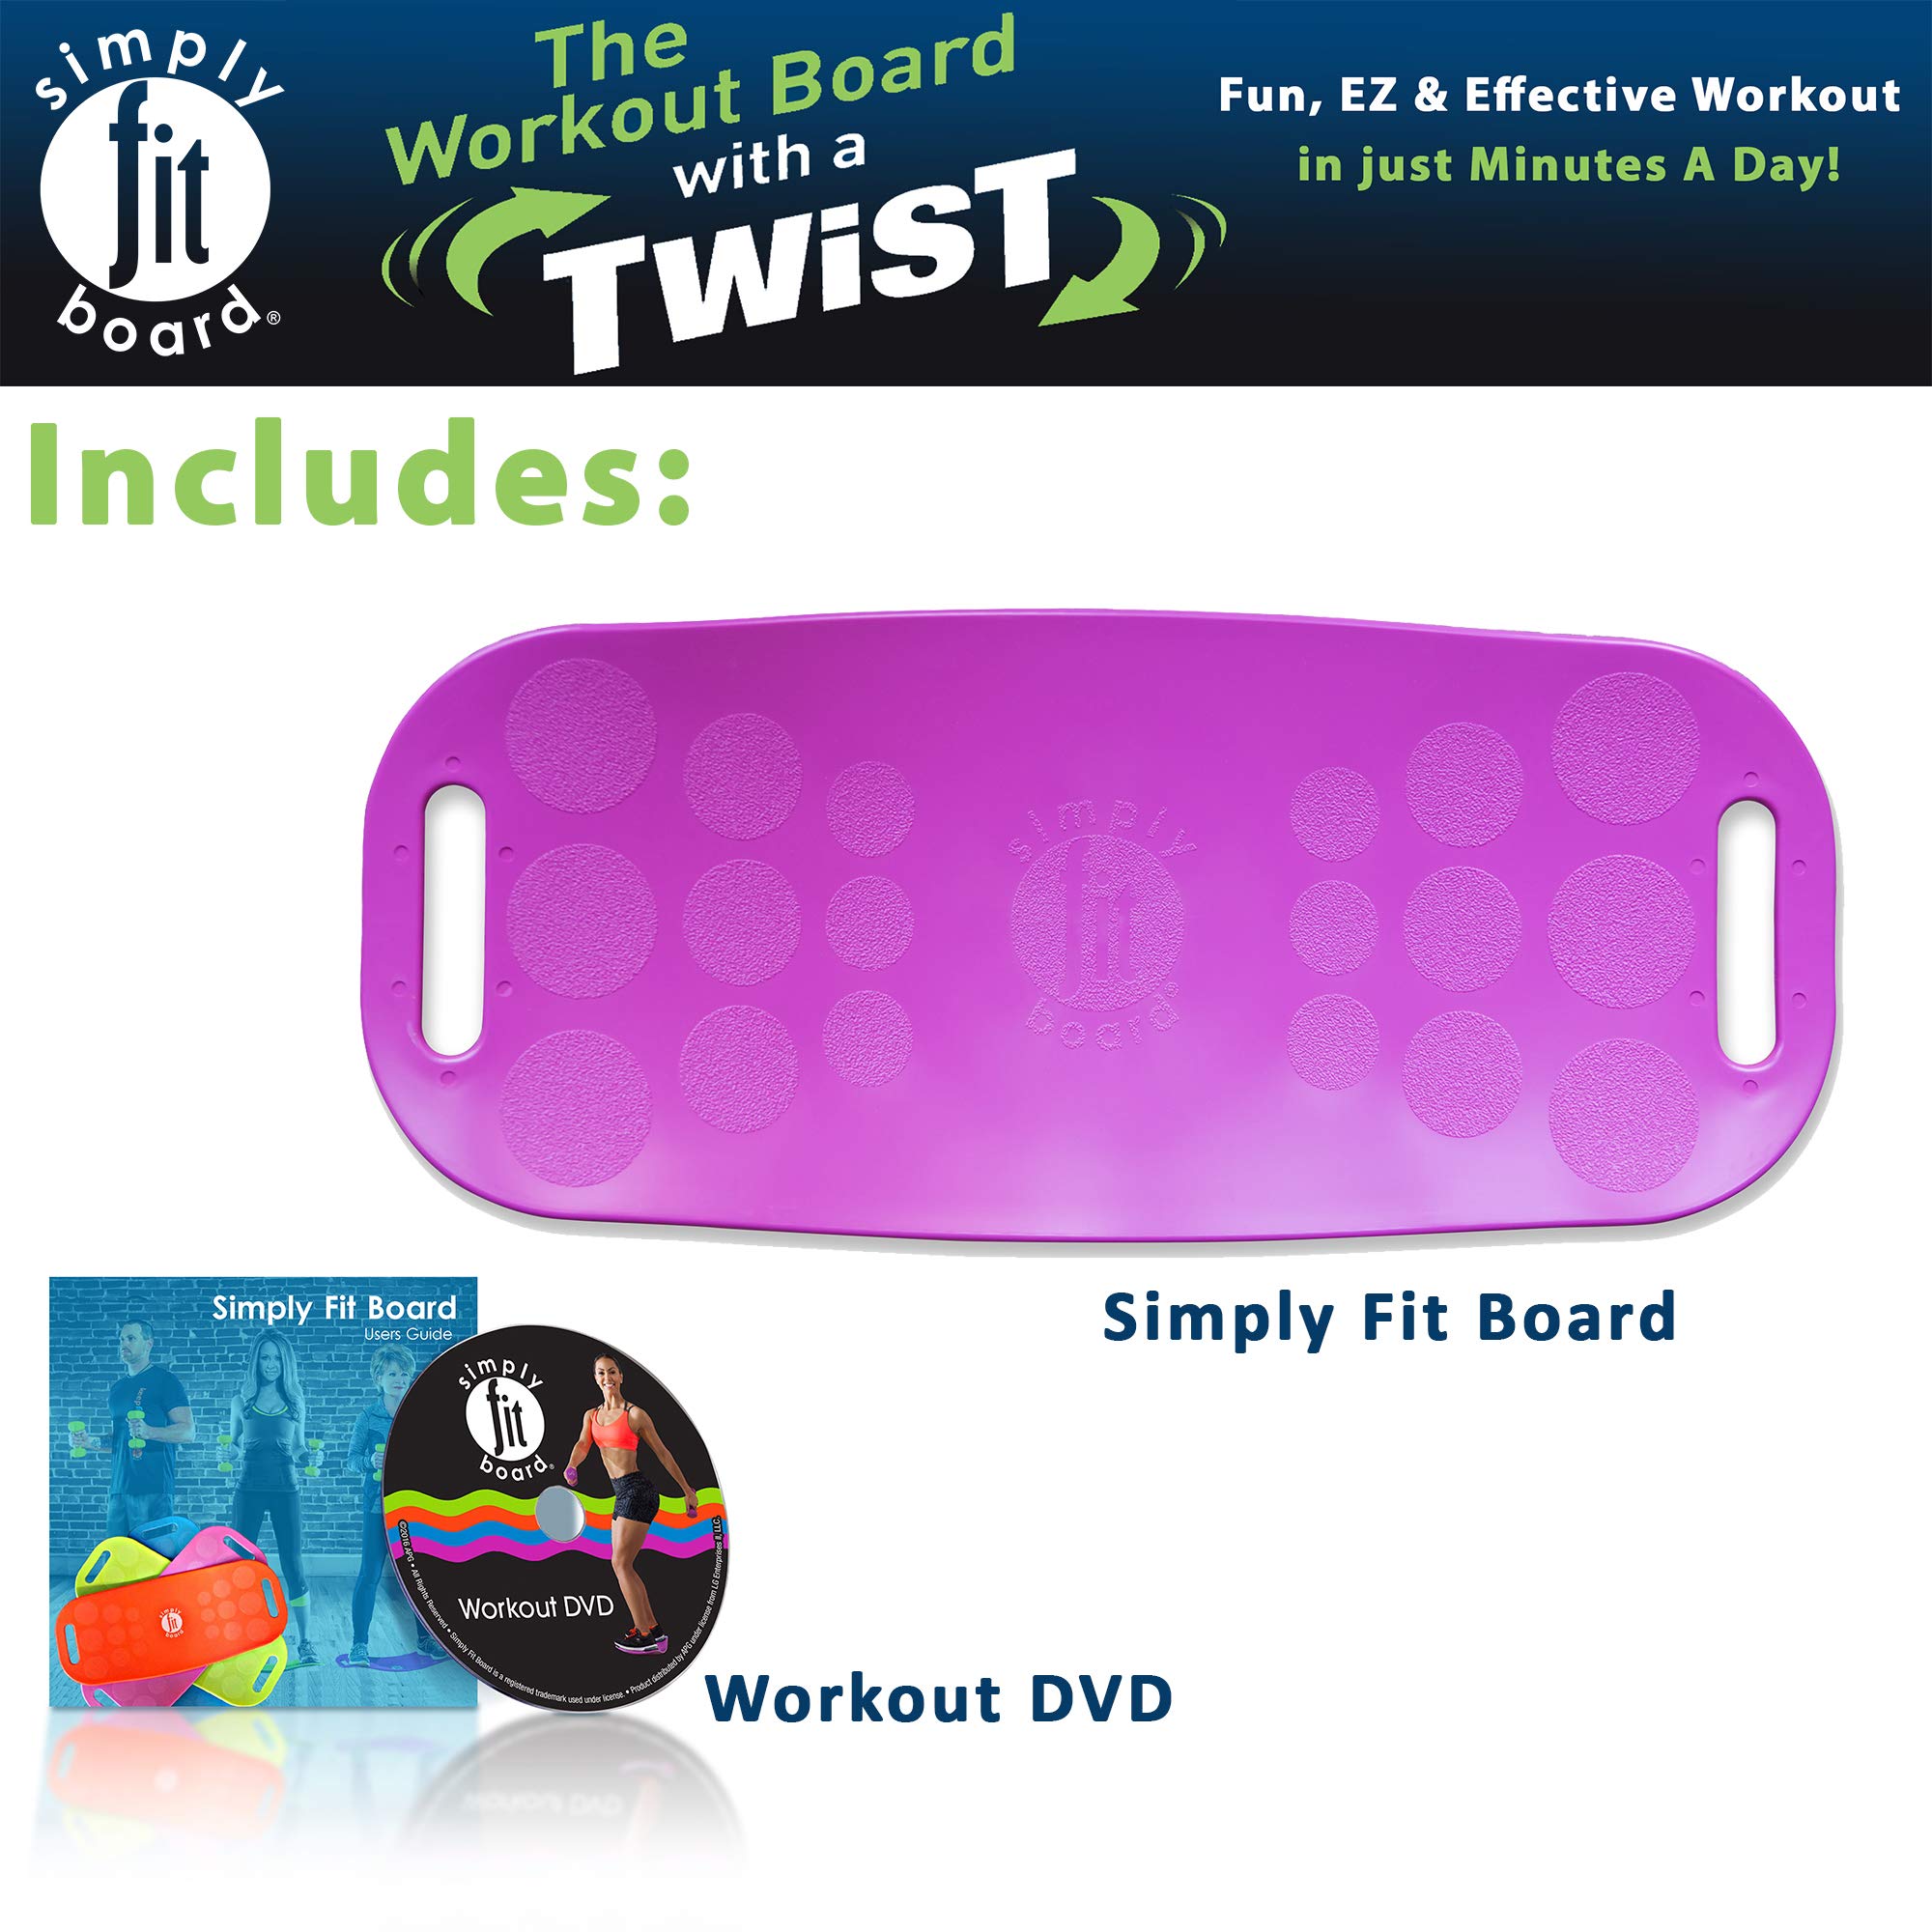 Simply Fit Board - The Workout Balance Board with a Twist, As Seen on TV